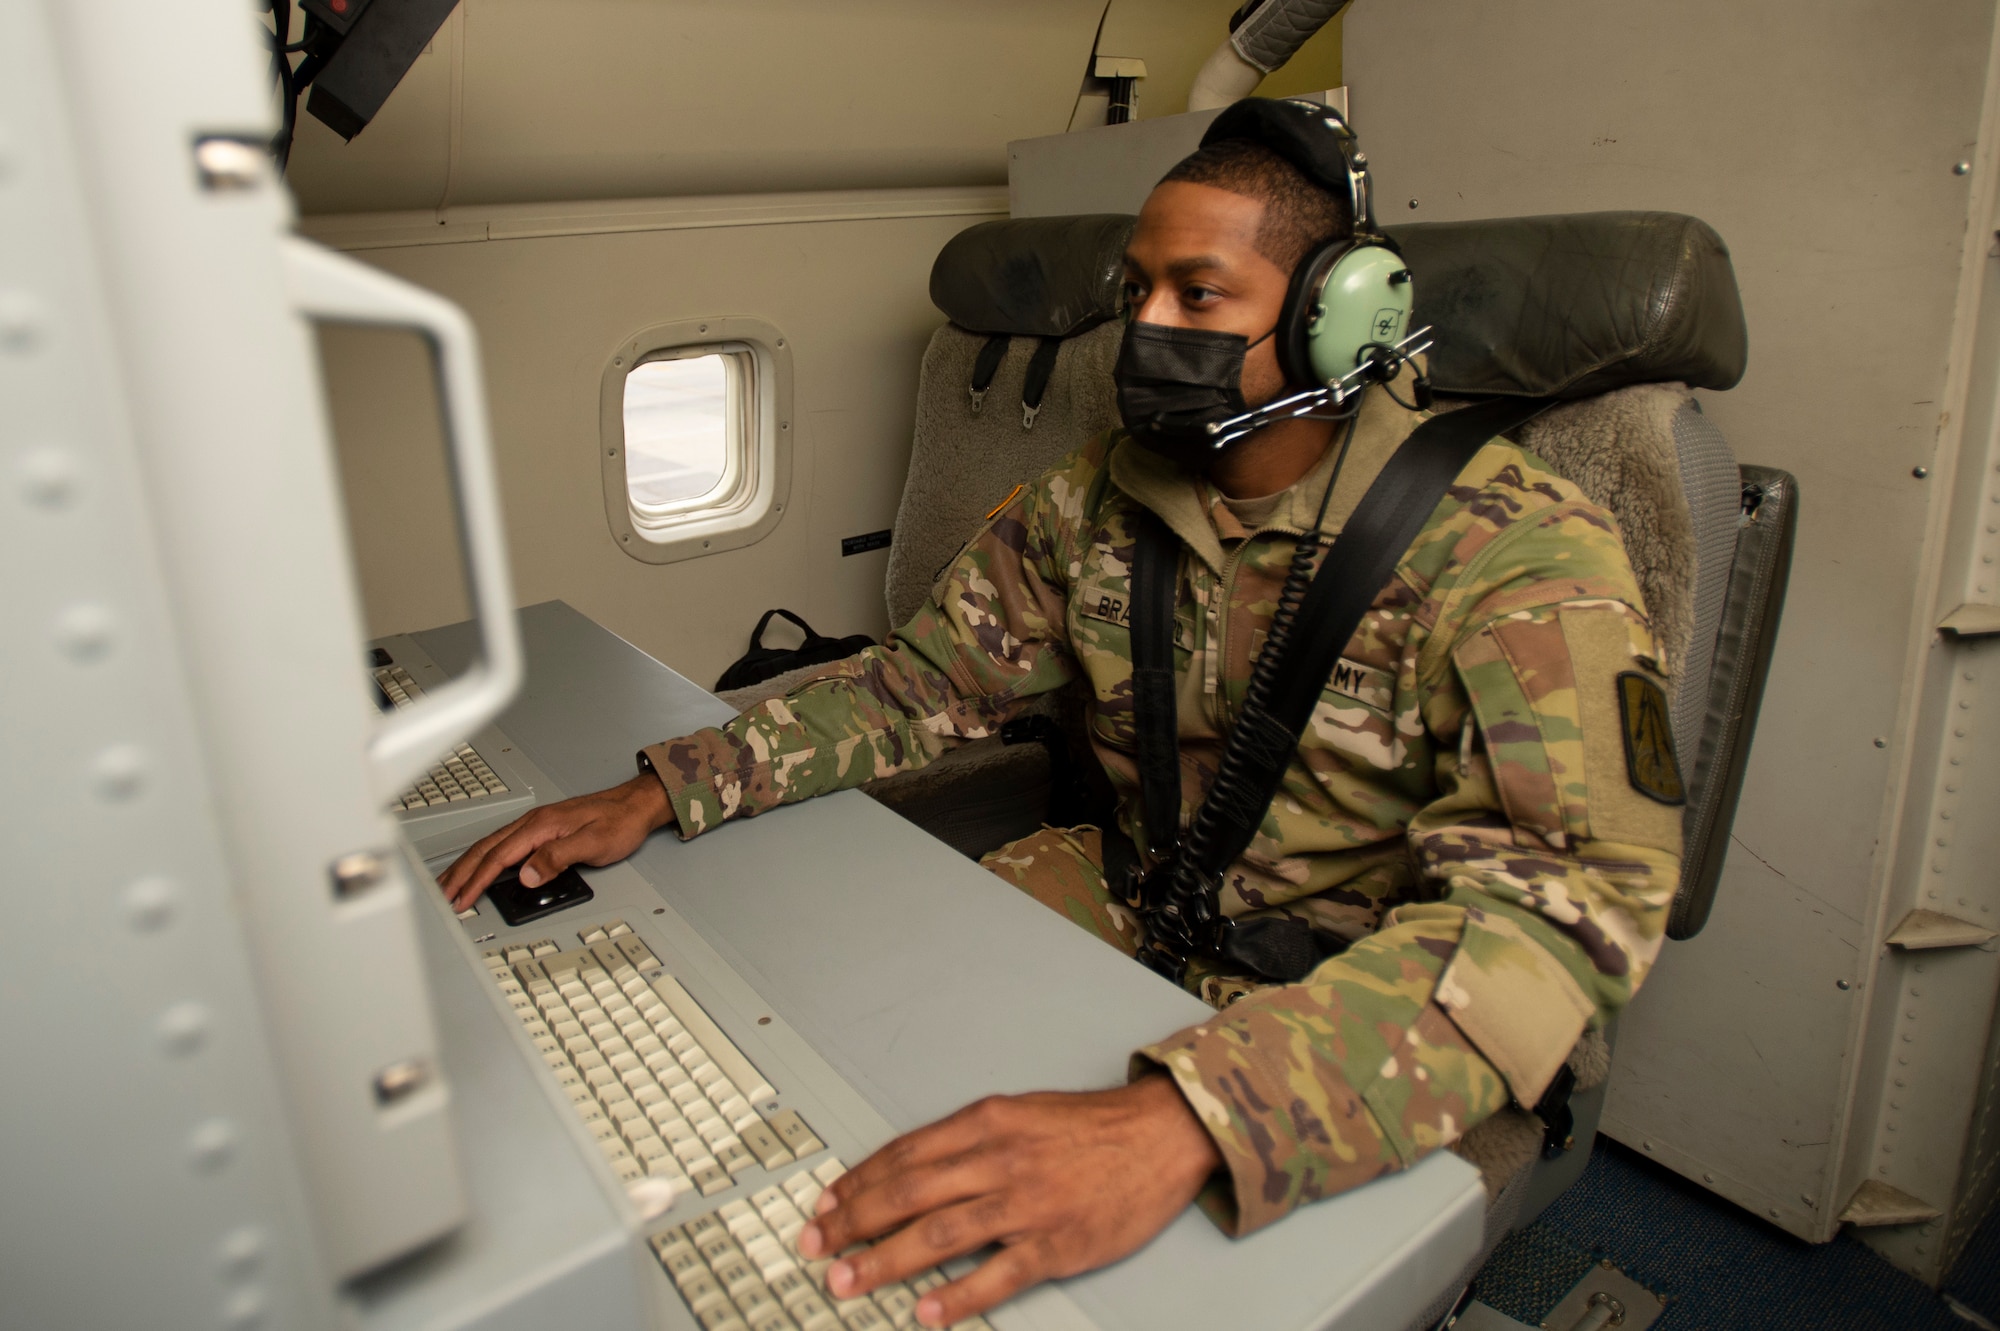 Photo shows man sitting on aircraft in front of a monitor.